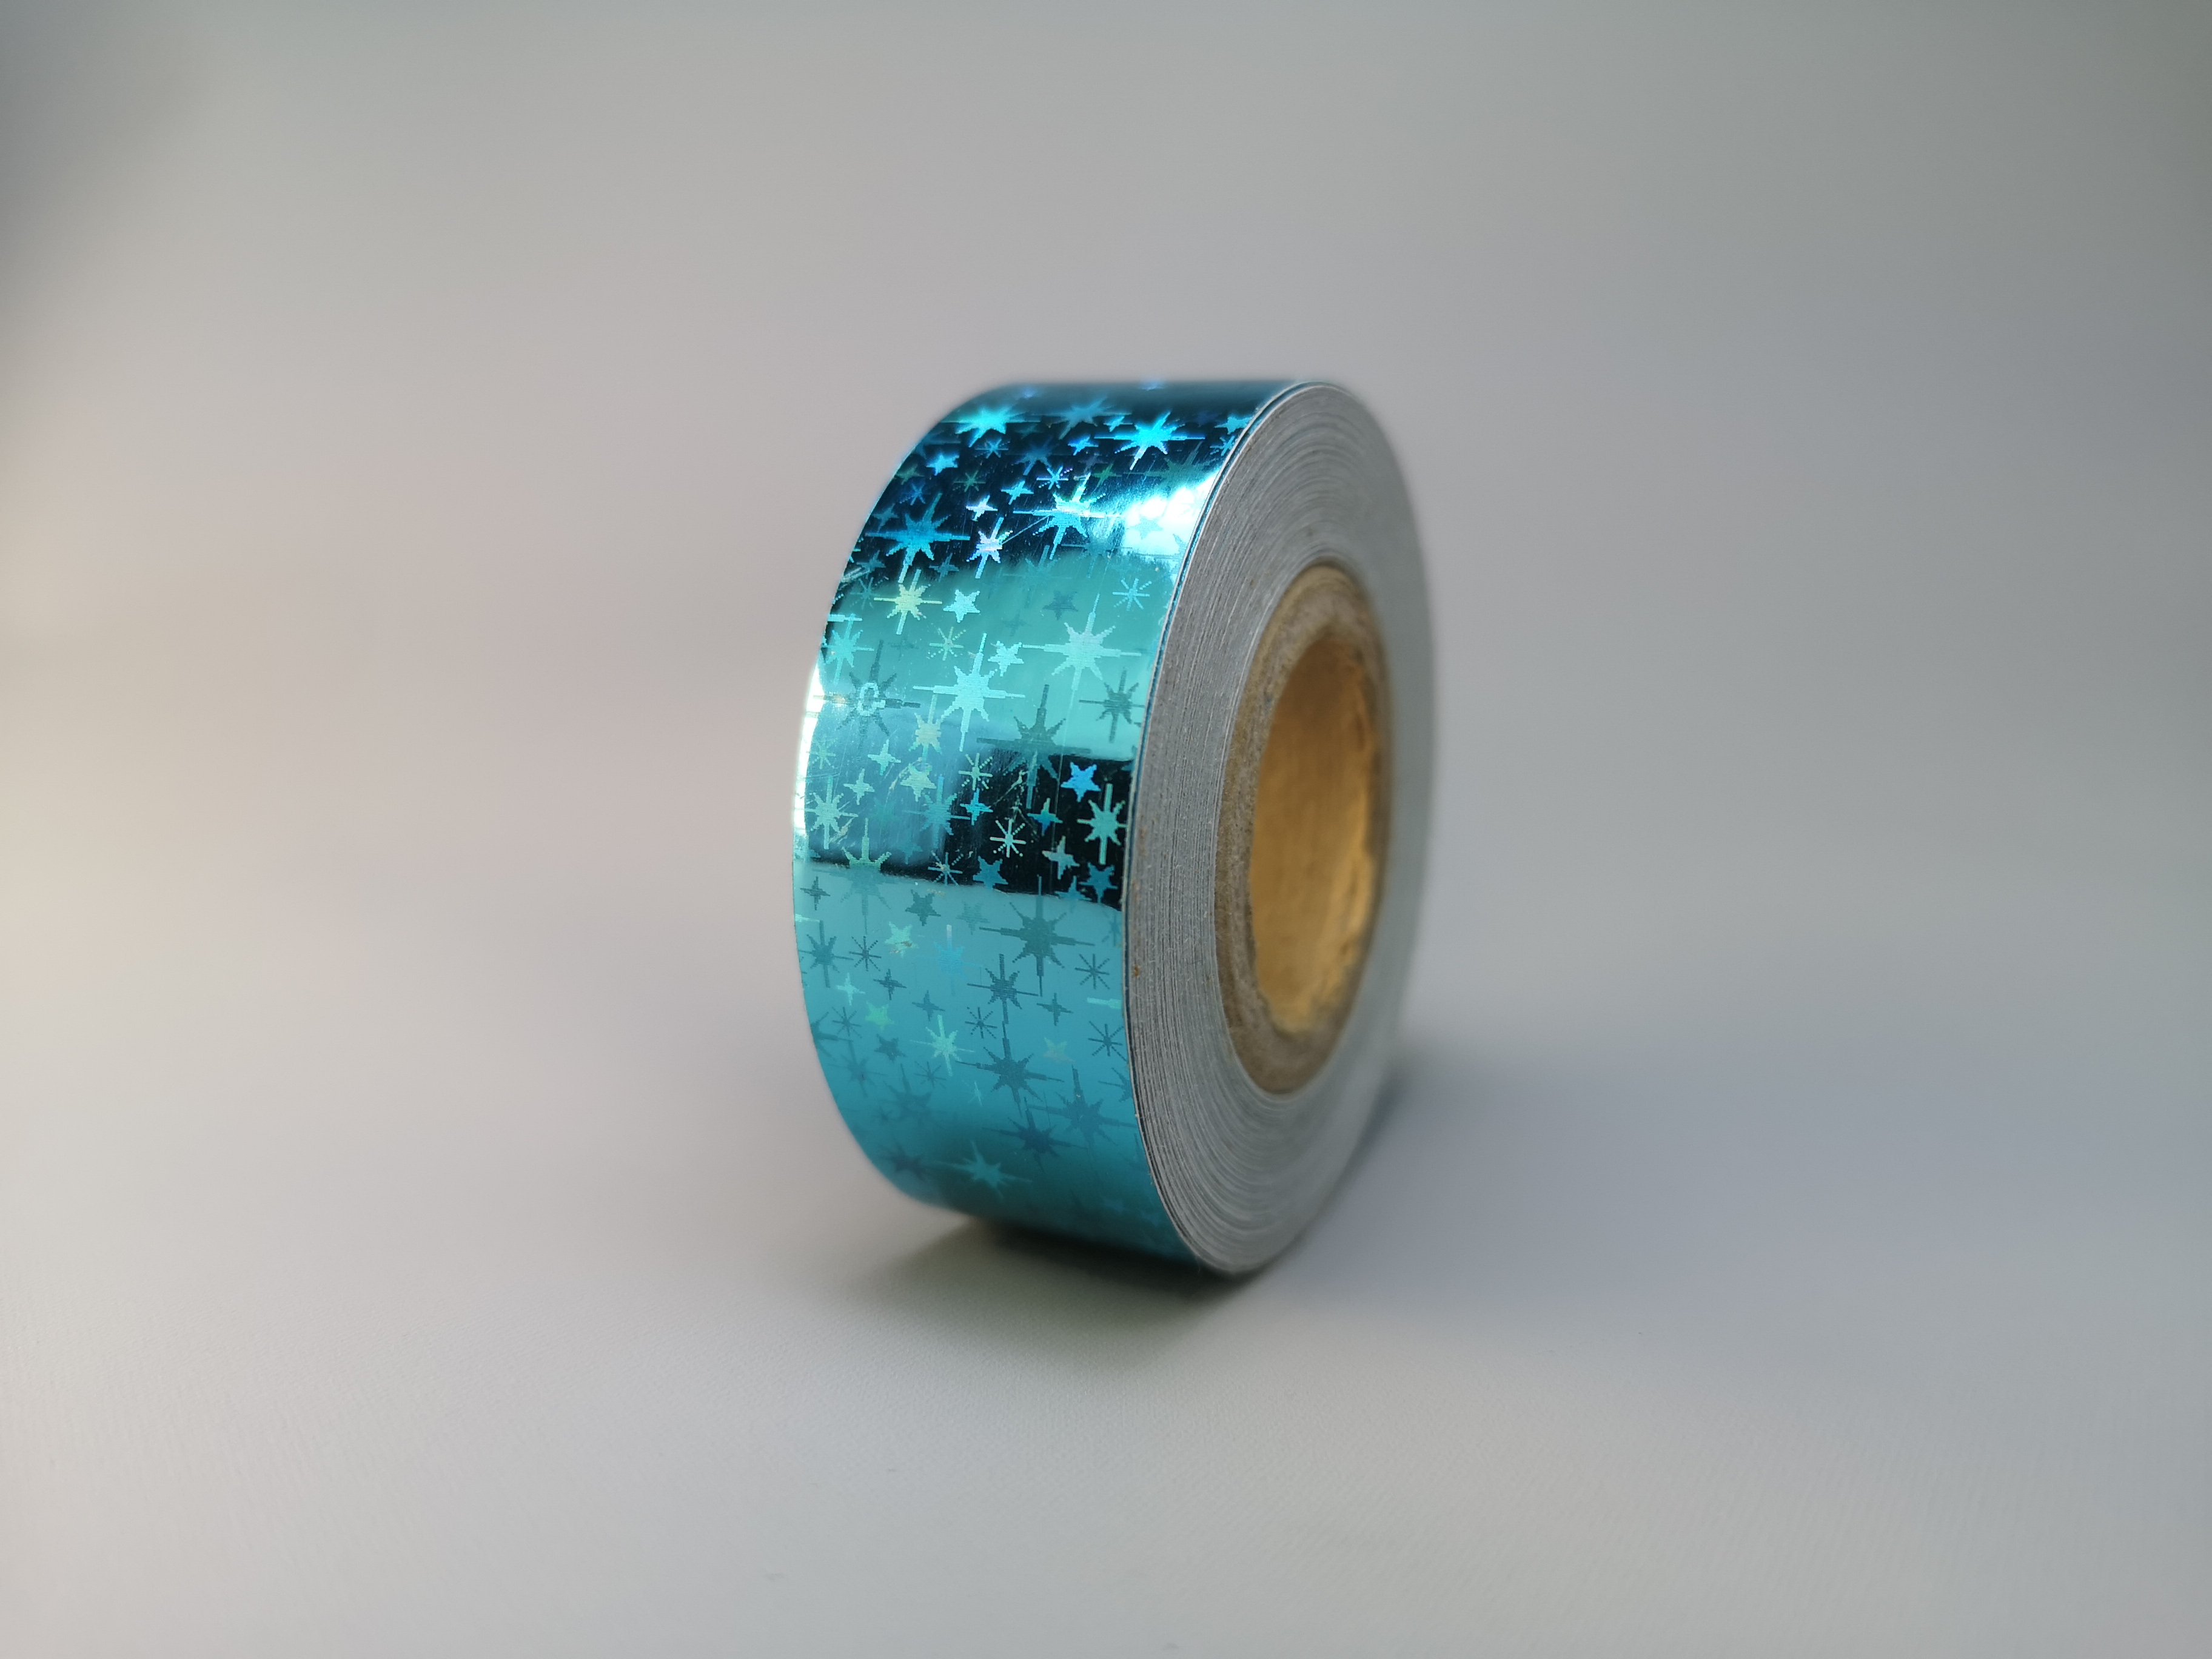 Holo Star Teal 11m Deco-Tape